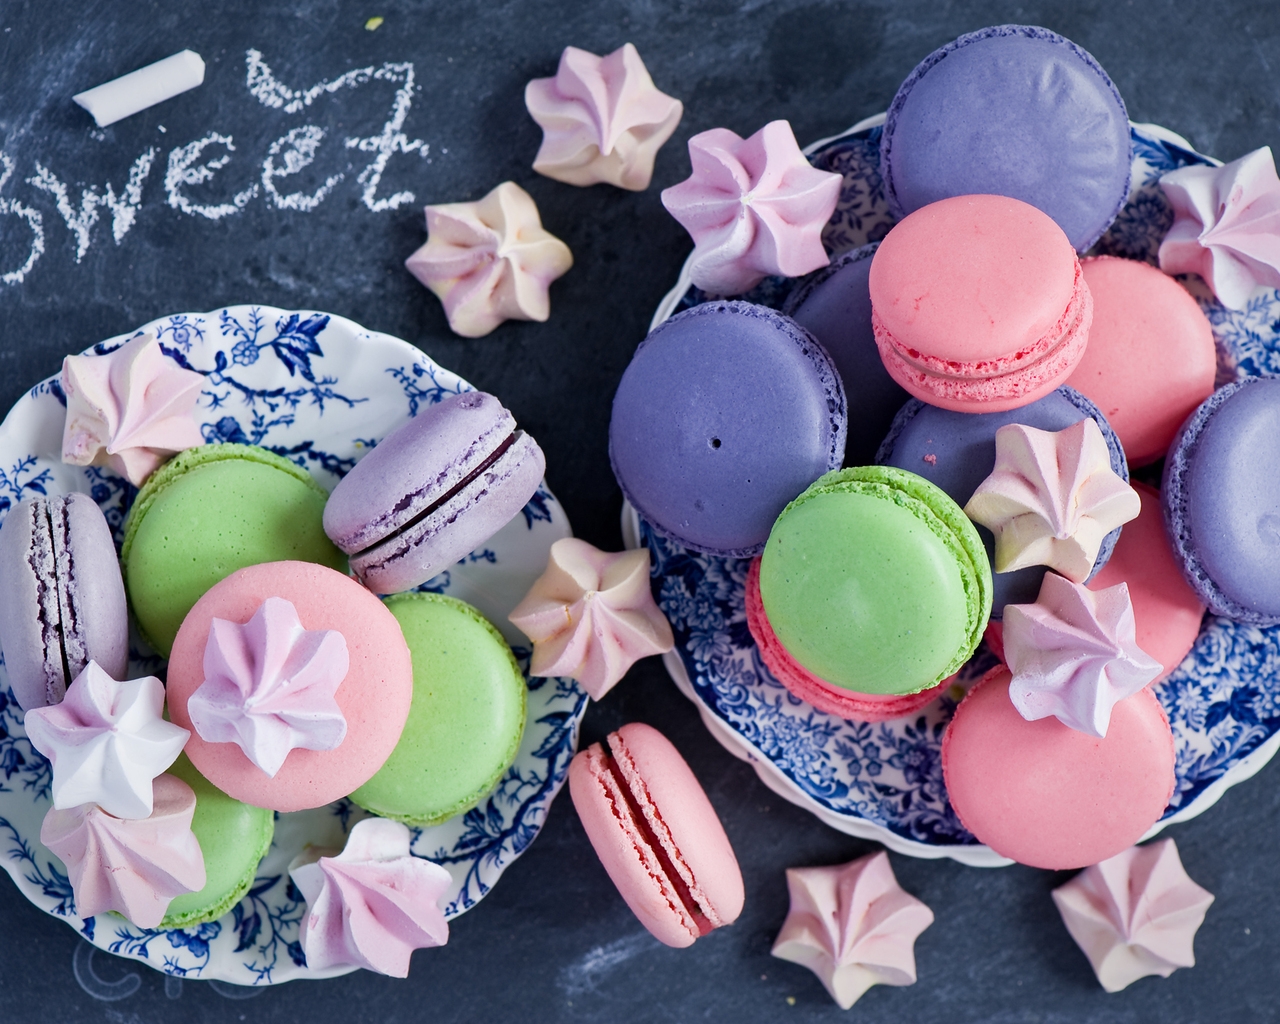 Macarons and Meringues for 1280 x 1024 resolution